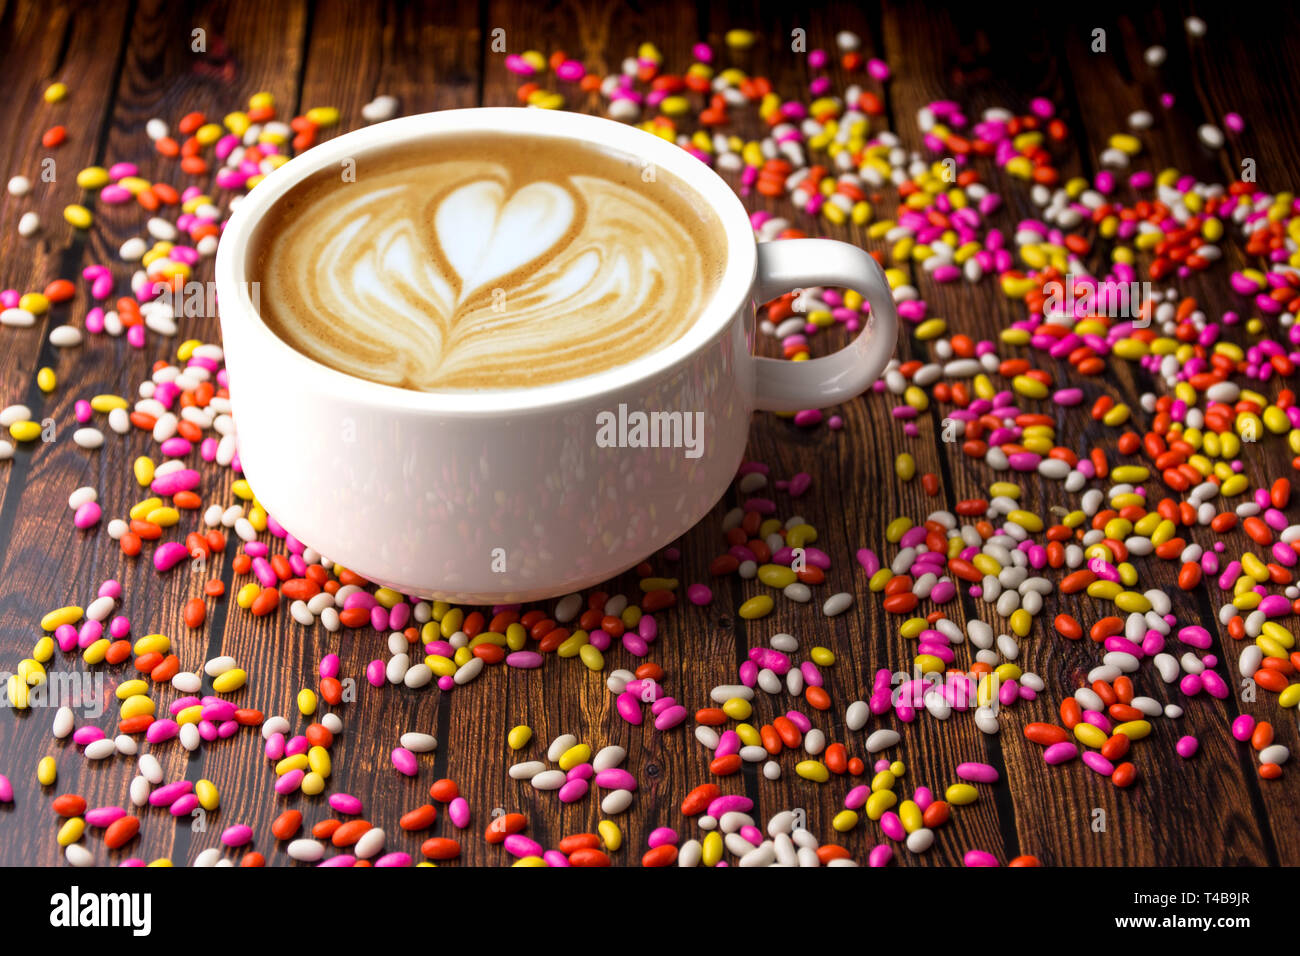 Cup of Cappuccino coffee on a wooden table with colorful sweet candies fresh and healthy tea Stock Photo